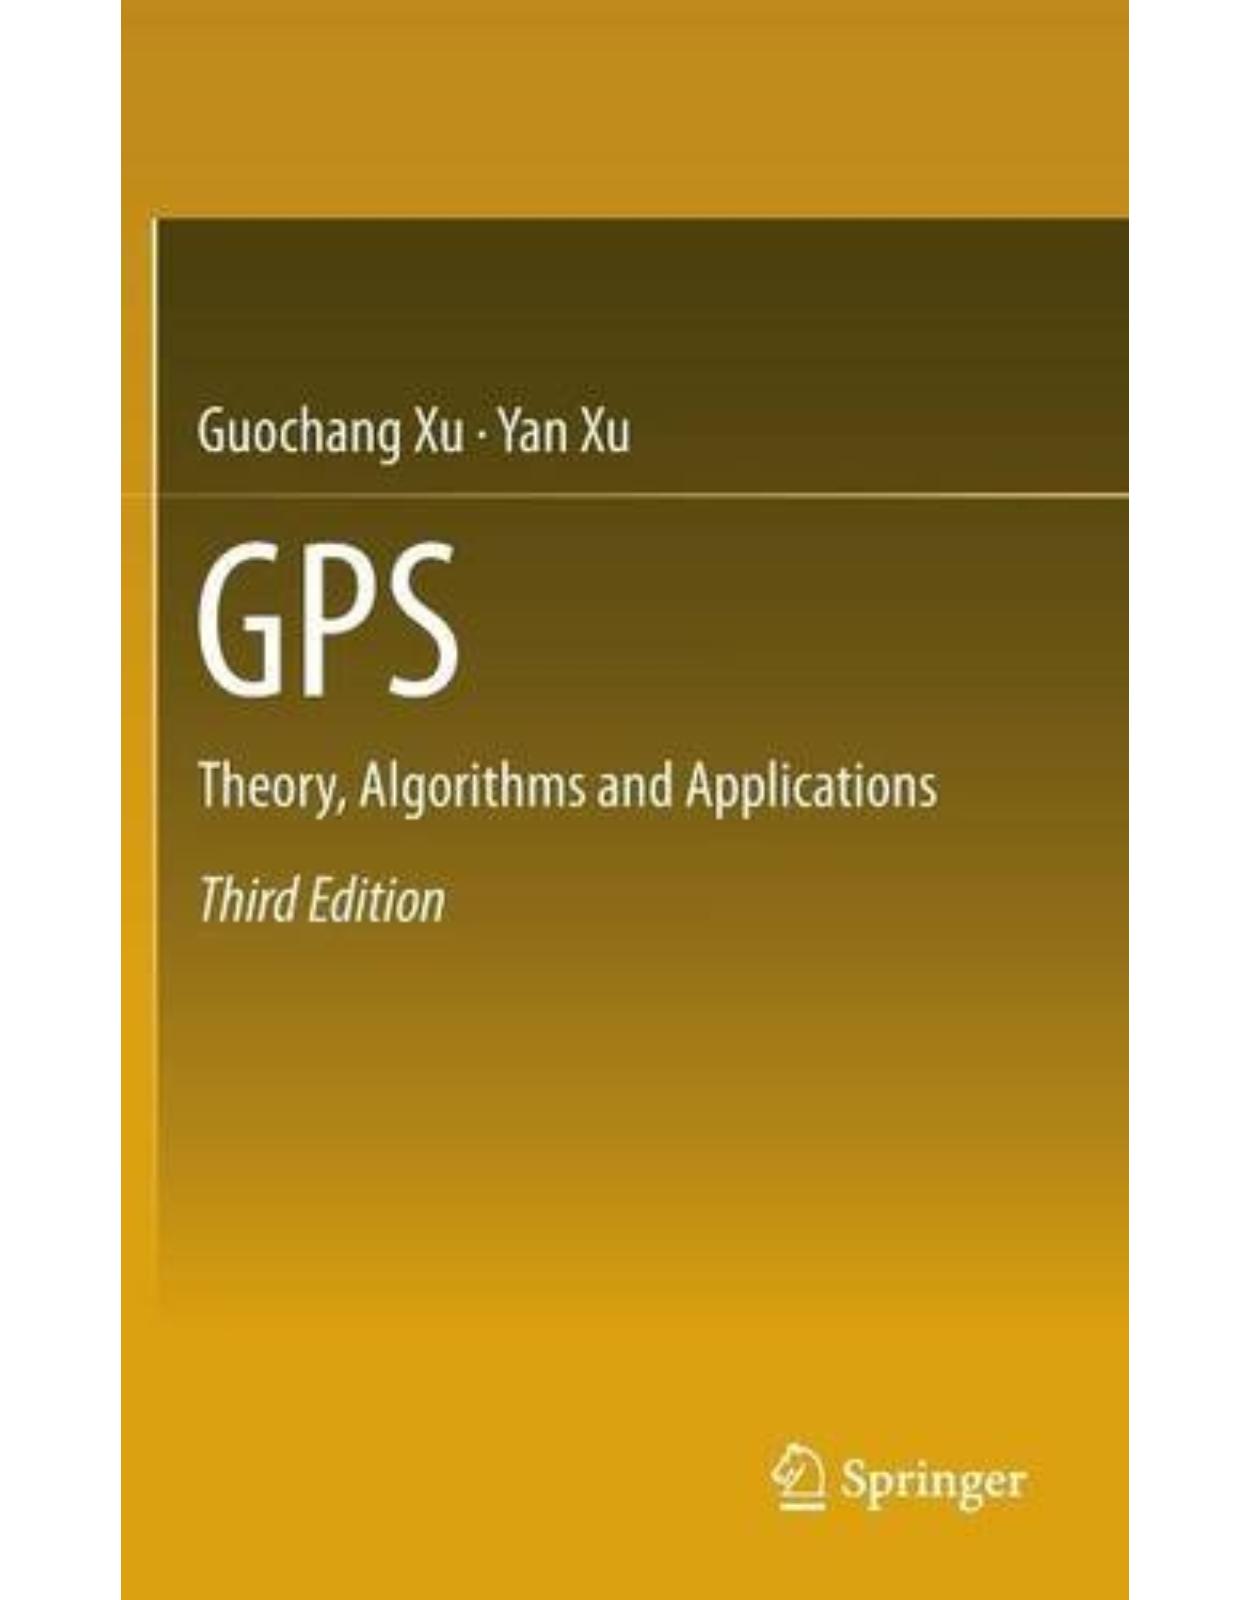 GPS: Theory, Algorithms and Applications